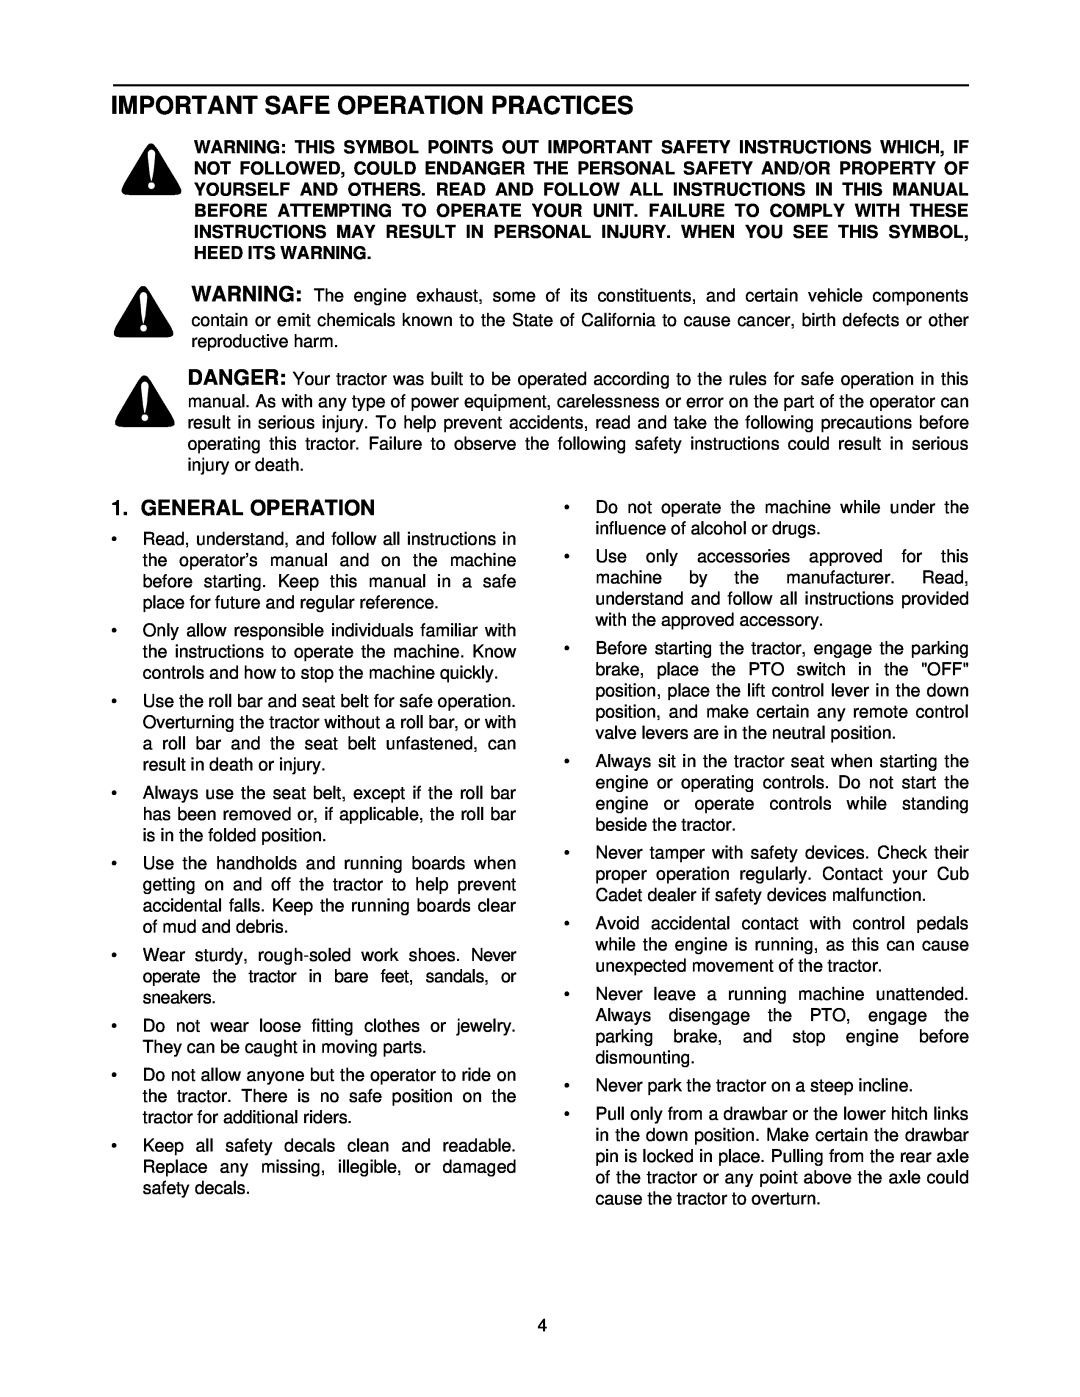 Cub Cadet 7252 manual Important Safe Operation Practices, General Operation 